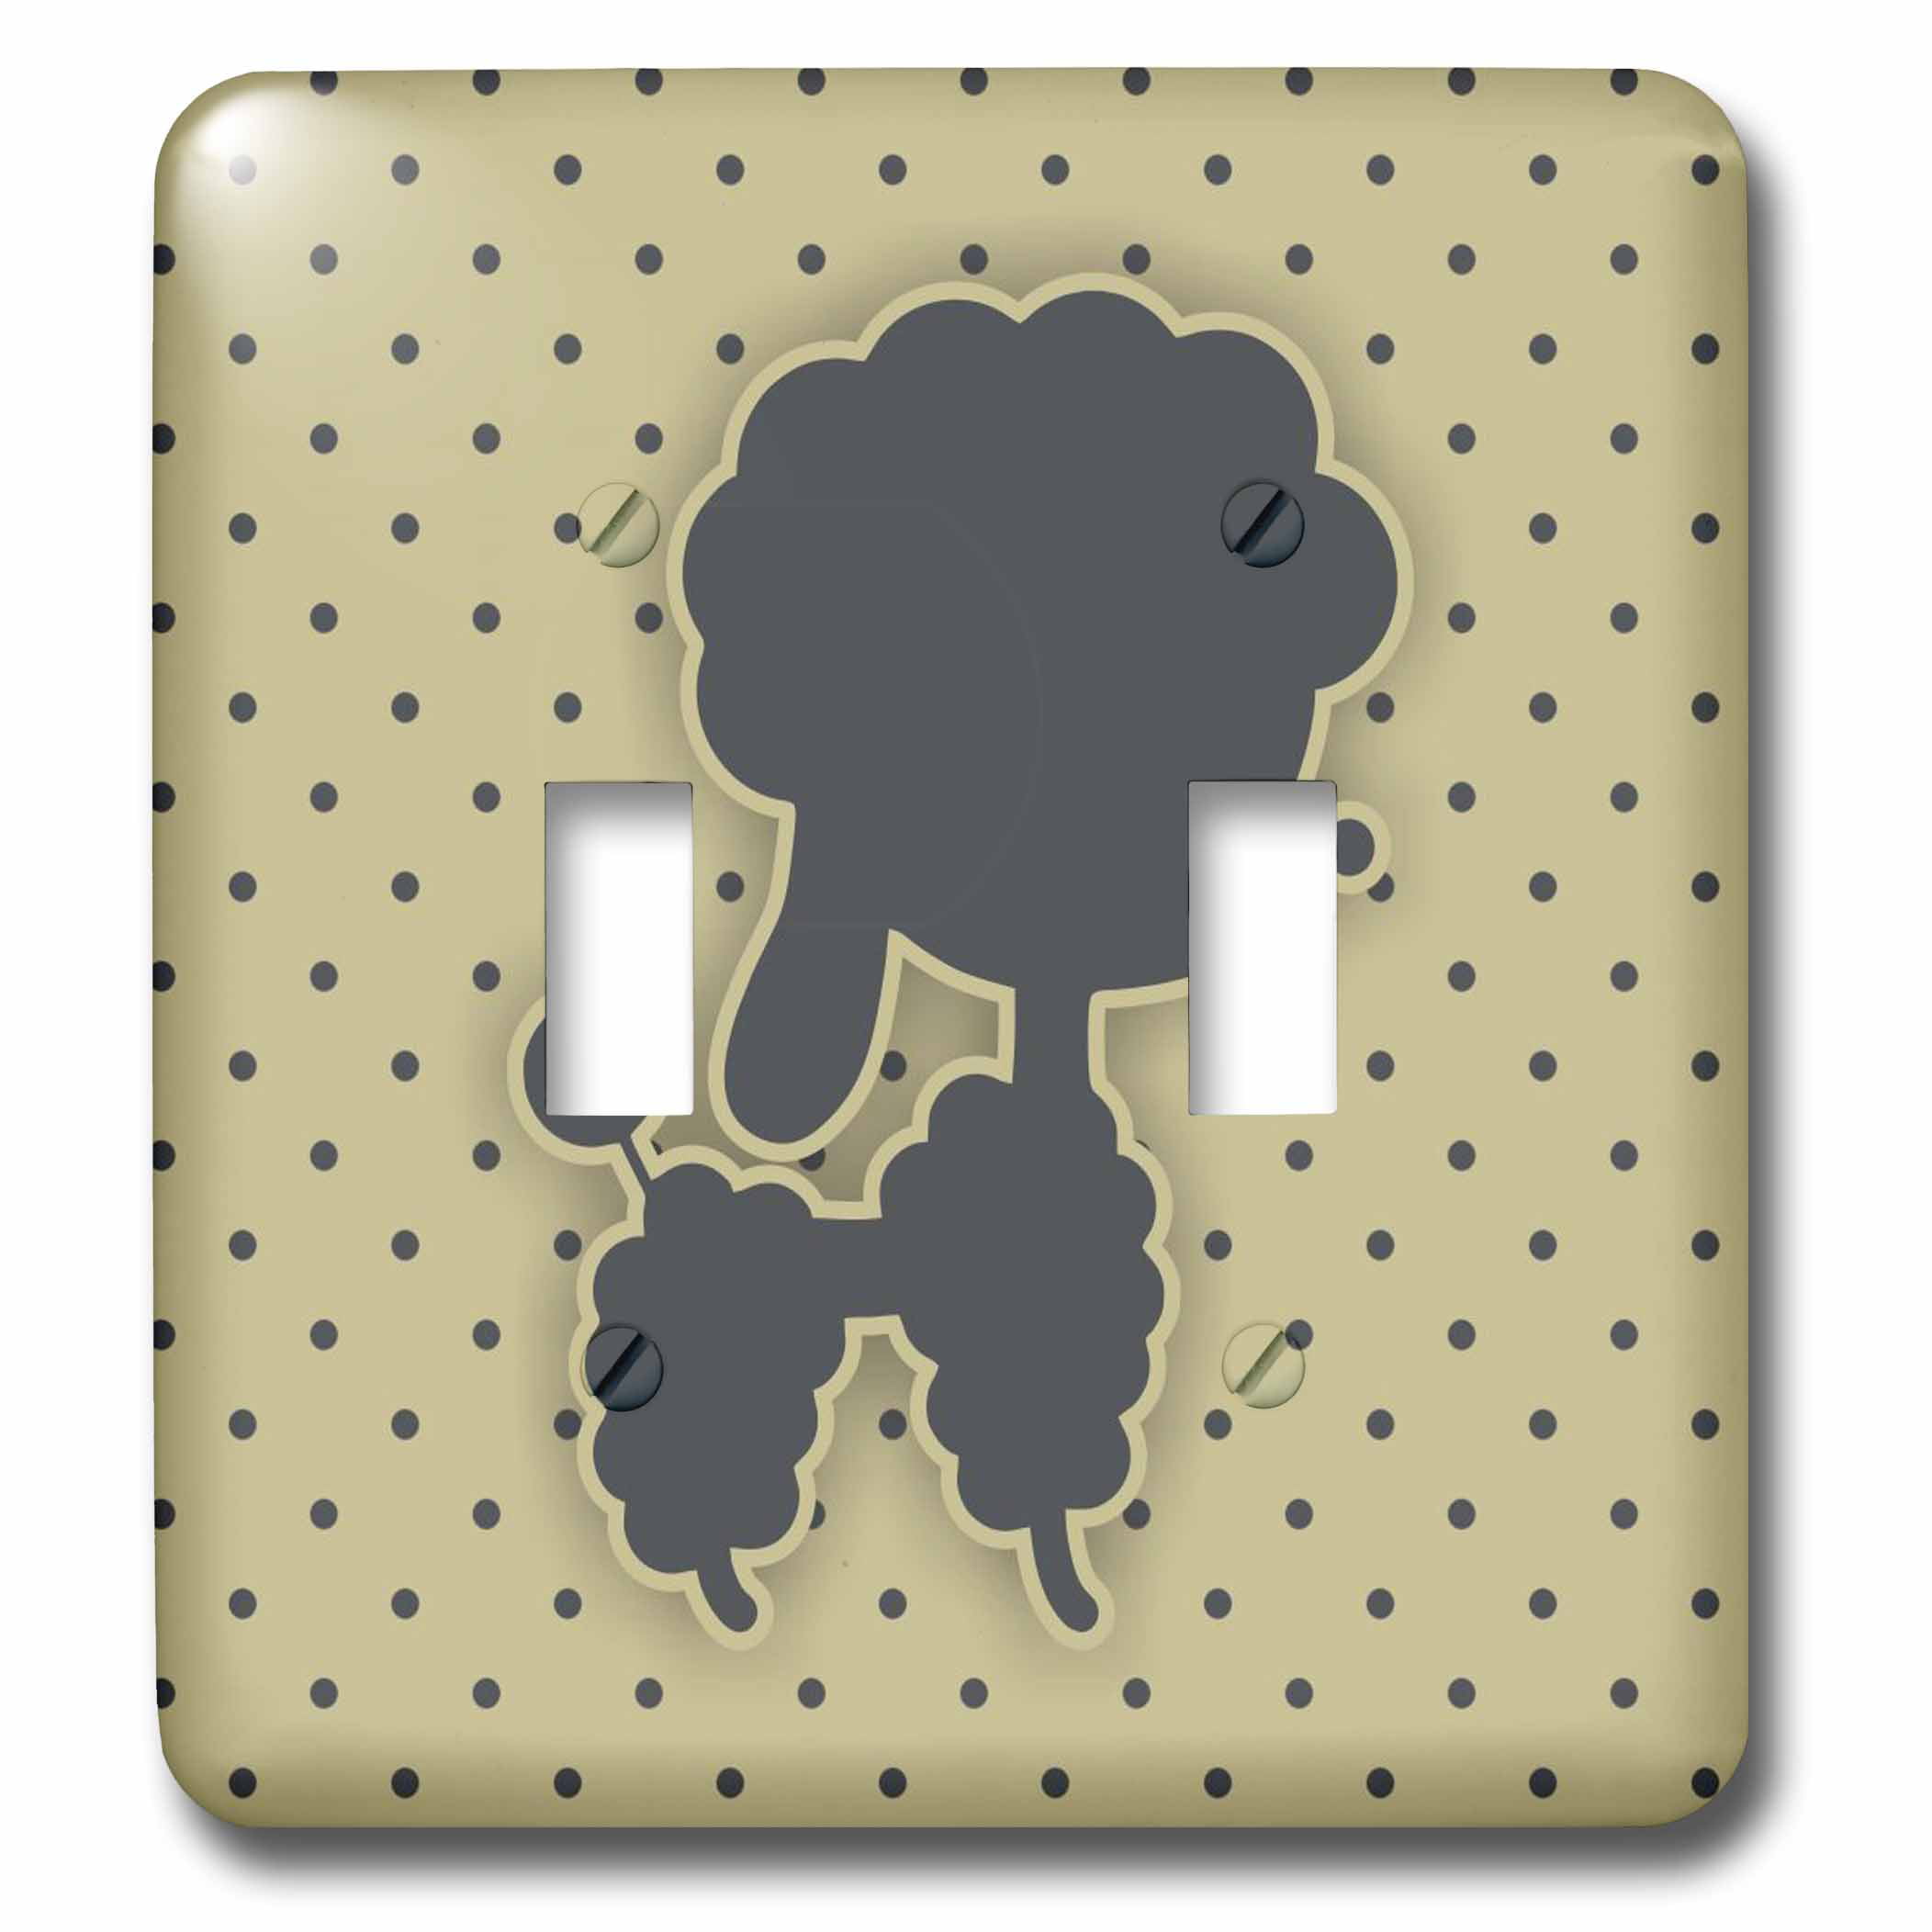 3dRose lsp_165509_6 Gray Shadowed Poodle On Milk Chocolate Chips Outlet Cover 